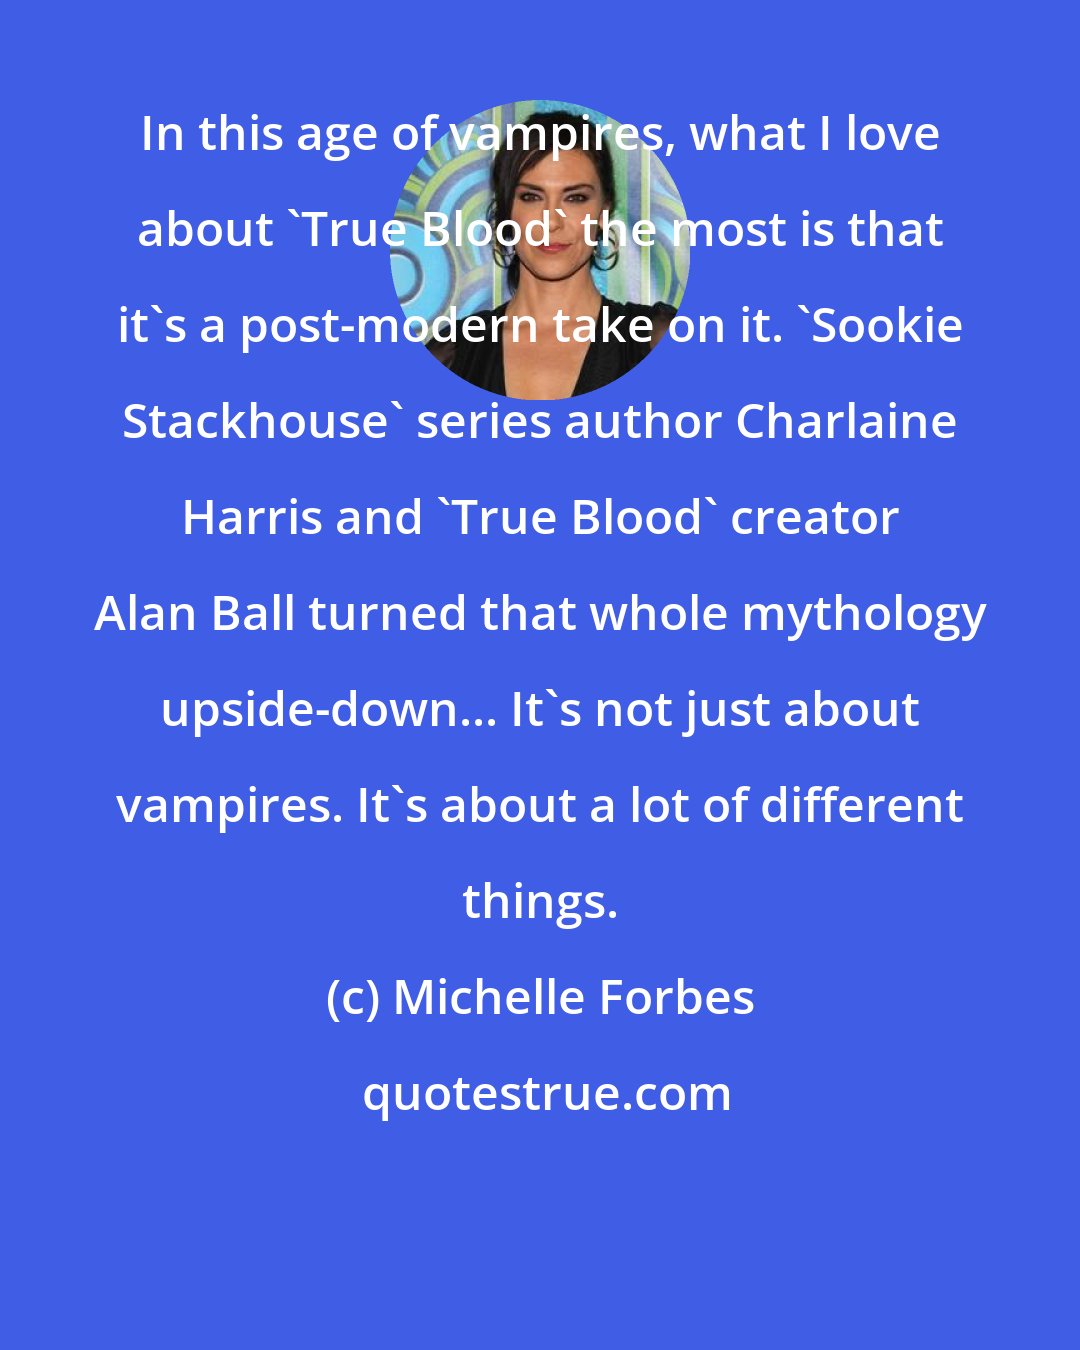 Michelle Forbes: In this age of vampires, what I love about 'True Blood' the most is that it's a post-modern take on it. 'Sookie Stackhouse' series author Charlaine Harris and 'True Blood' creator Alan Ball turned that whole mythology upside-down... It's not just about vampires. It's about a lot of different things.